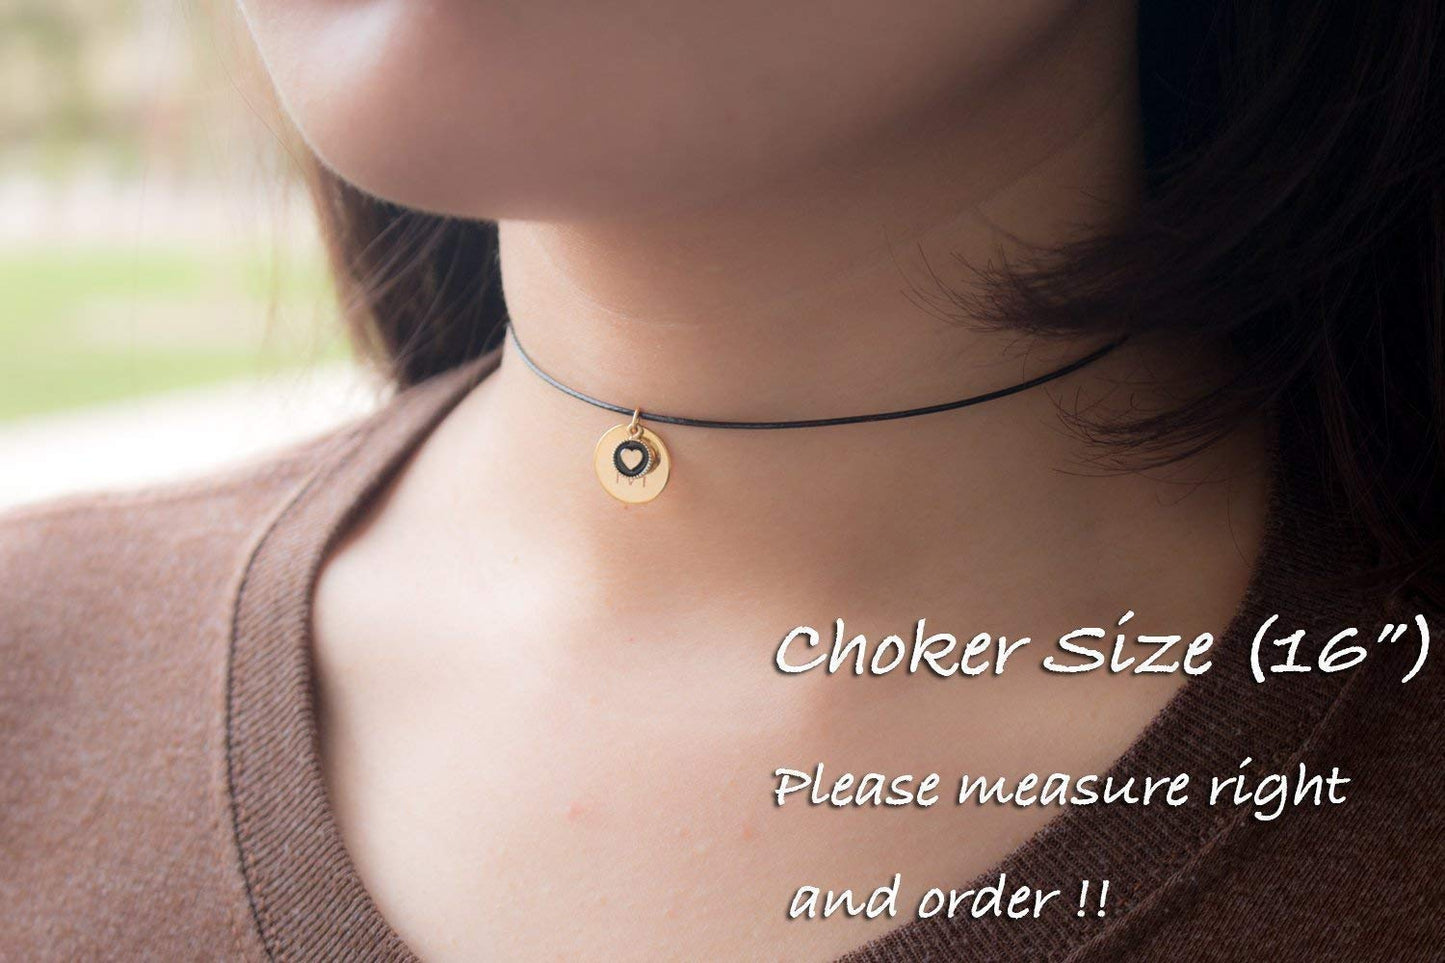 Initial Disc Choker Necklace With Heart Charm